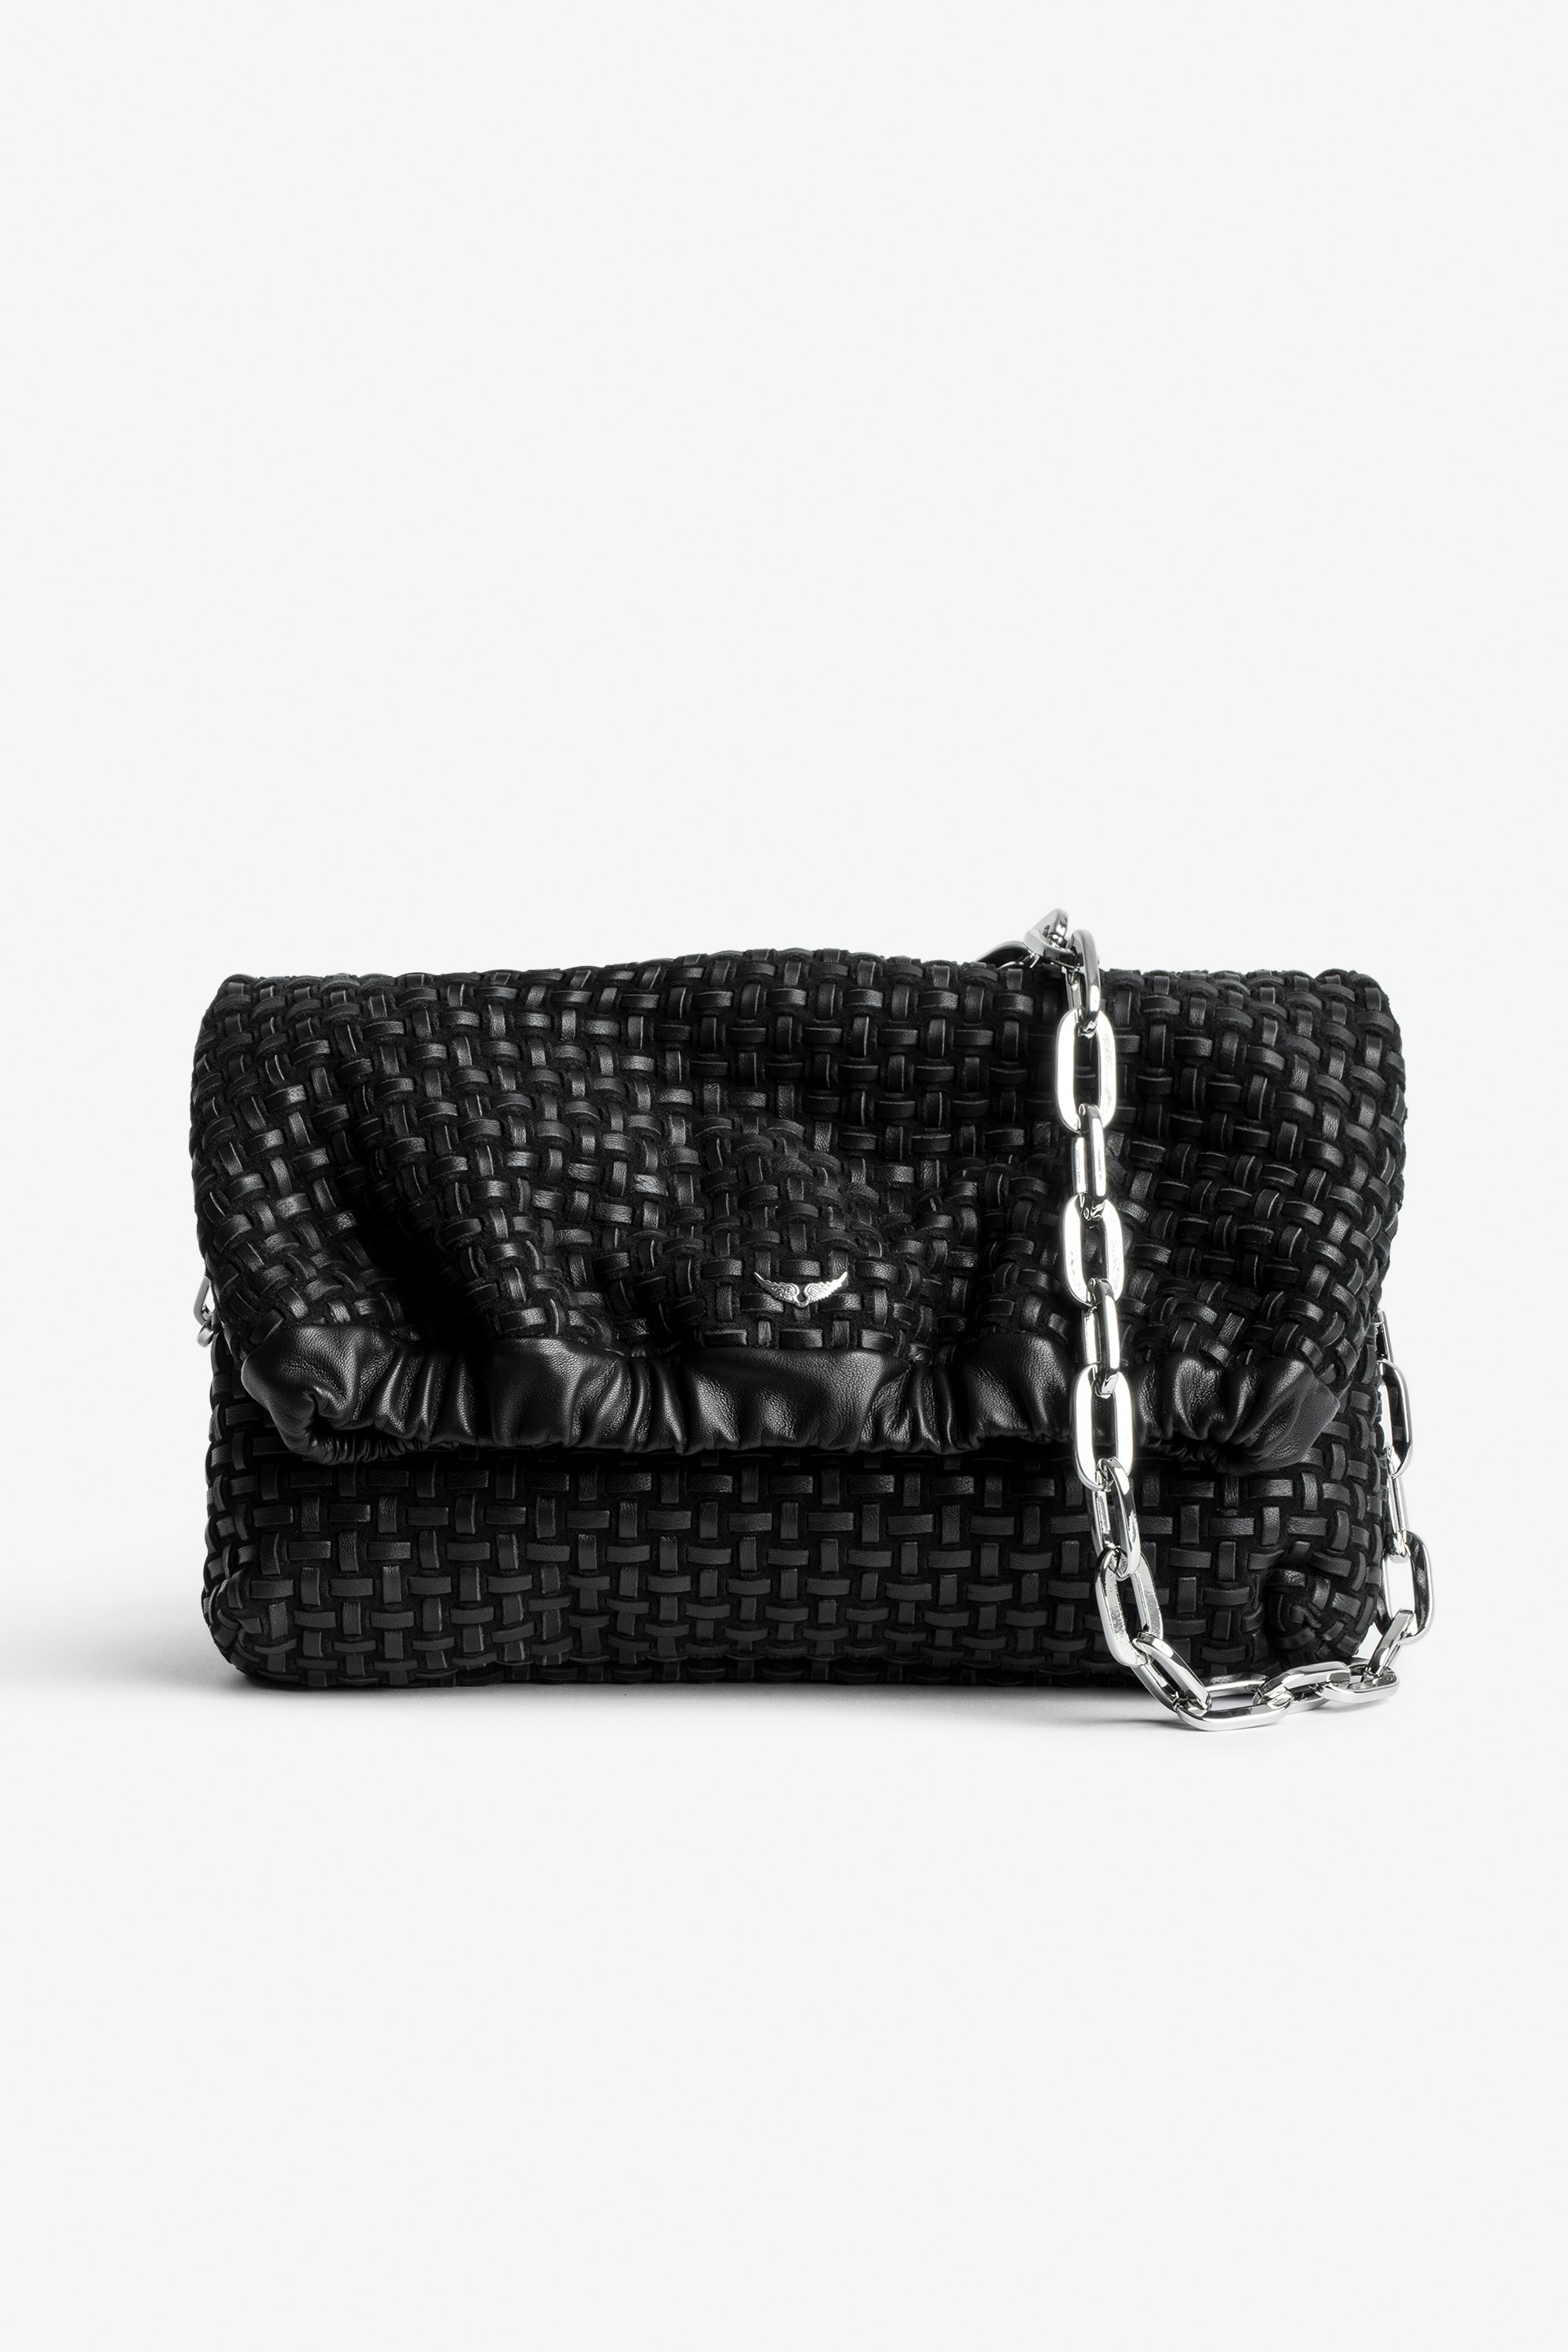 Rockyssime Bag Women’s bag in black latticework leather with gathered closure and metal chain